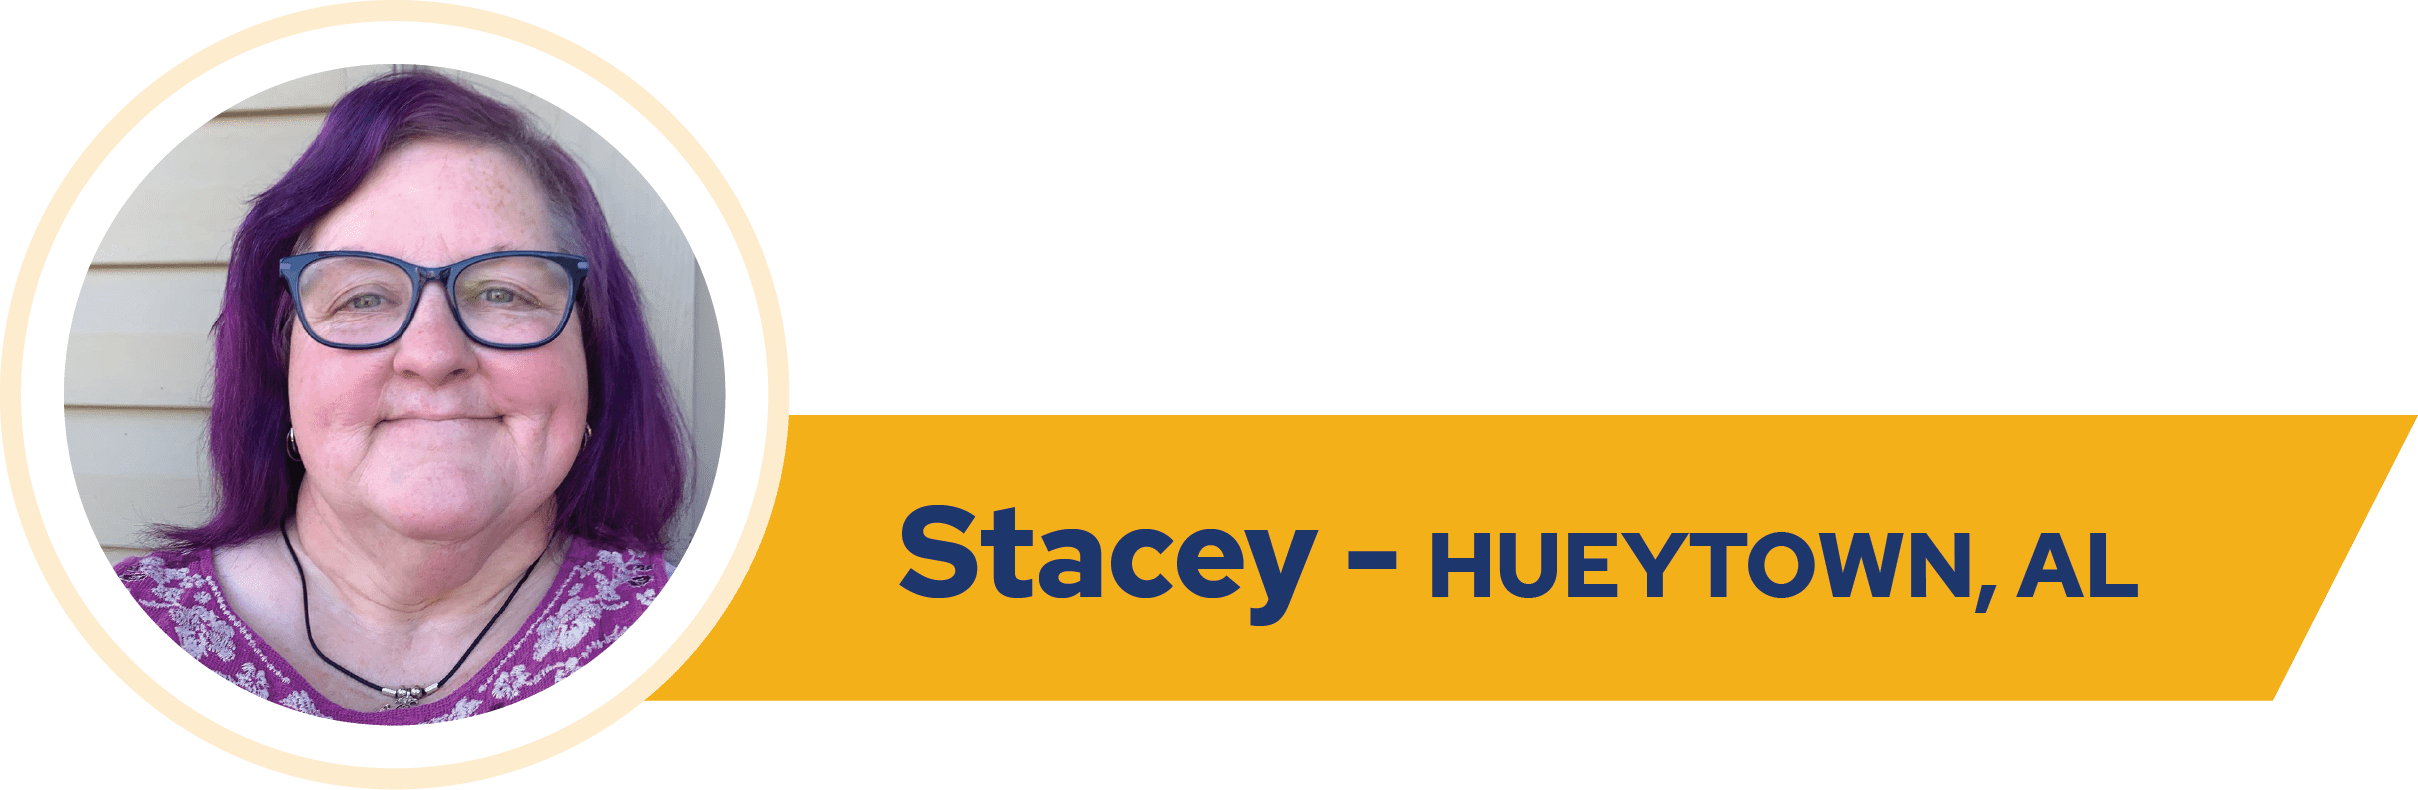 Stacey Badge